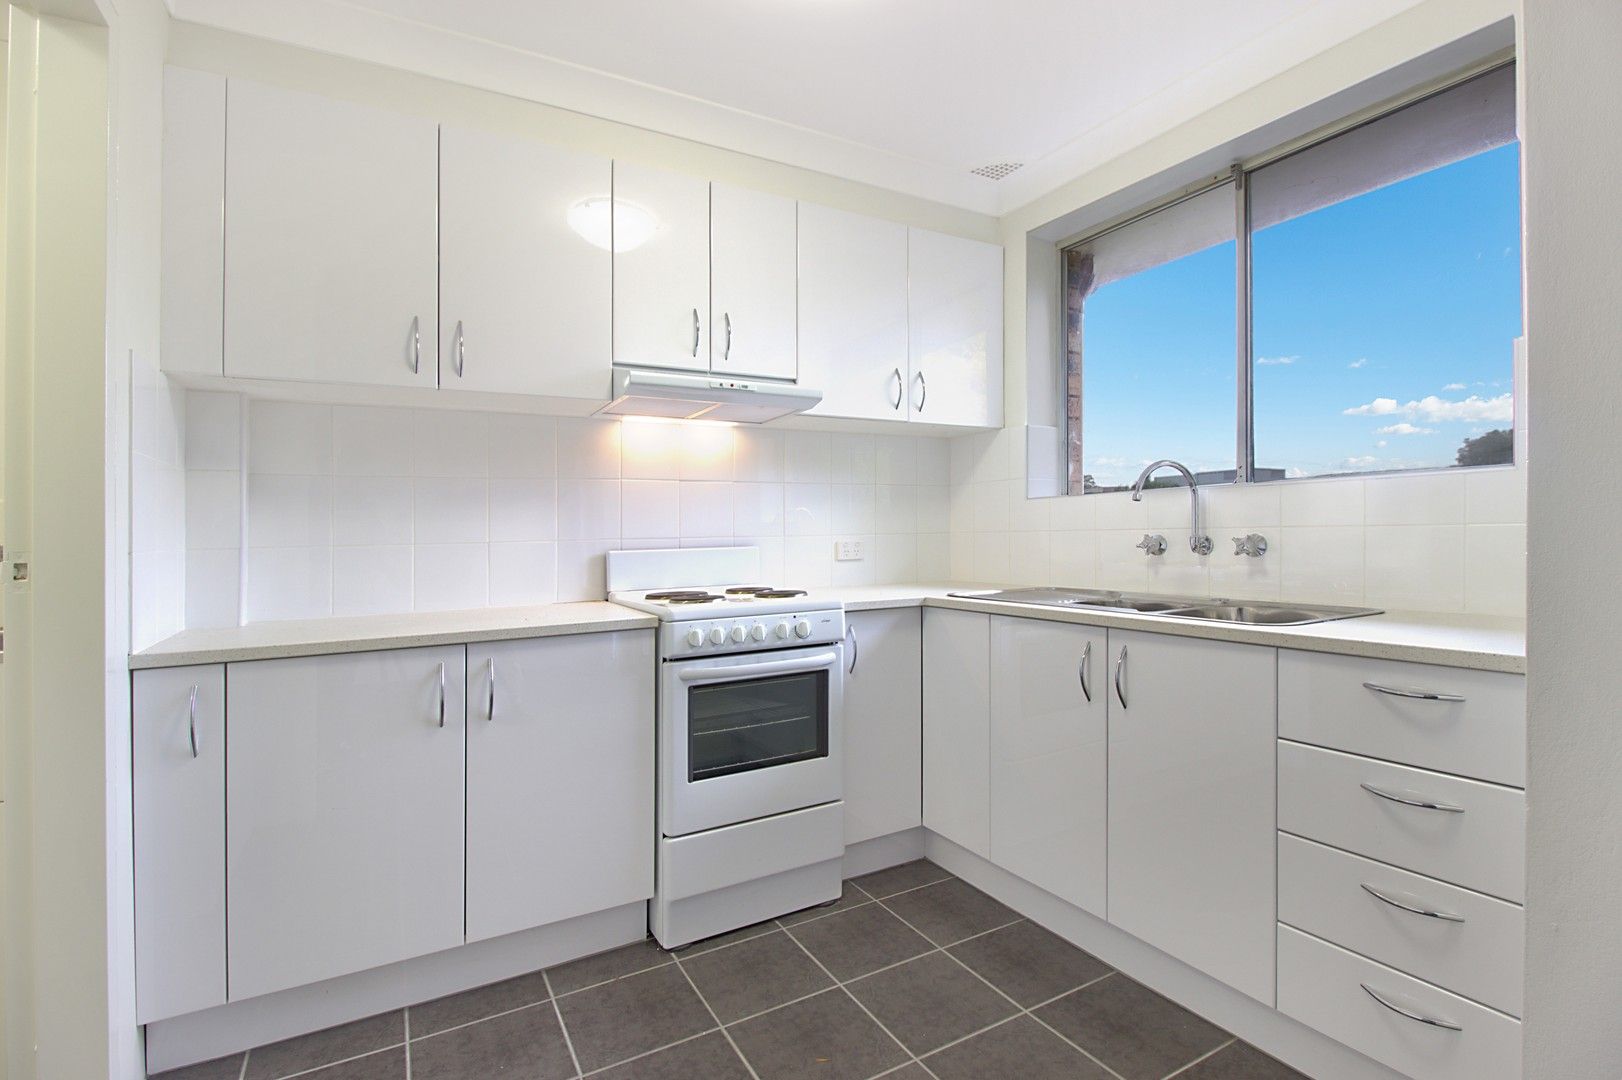 2 bedrooms Apartment / Unit / Flat in 5/7 Sinclair Street GOSFORD NSW, 2250